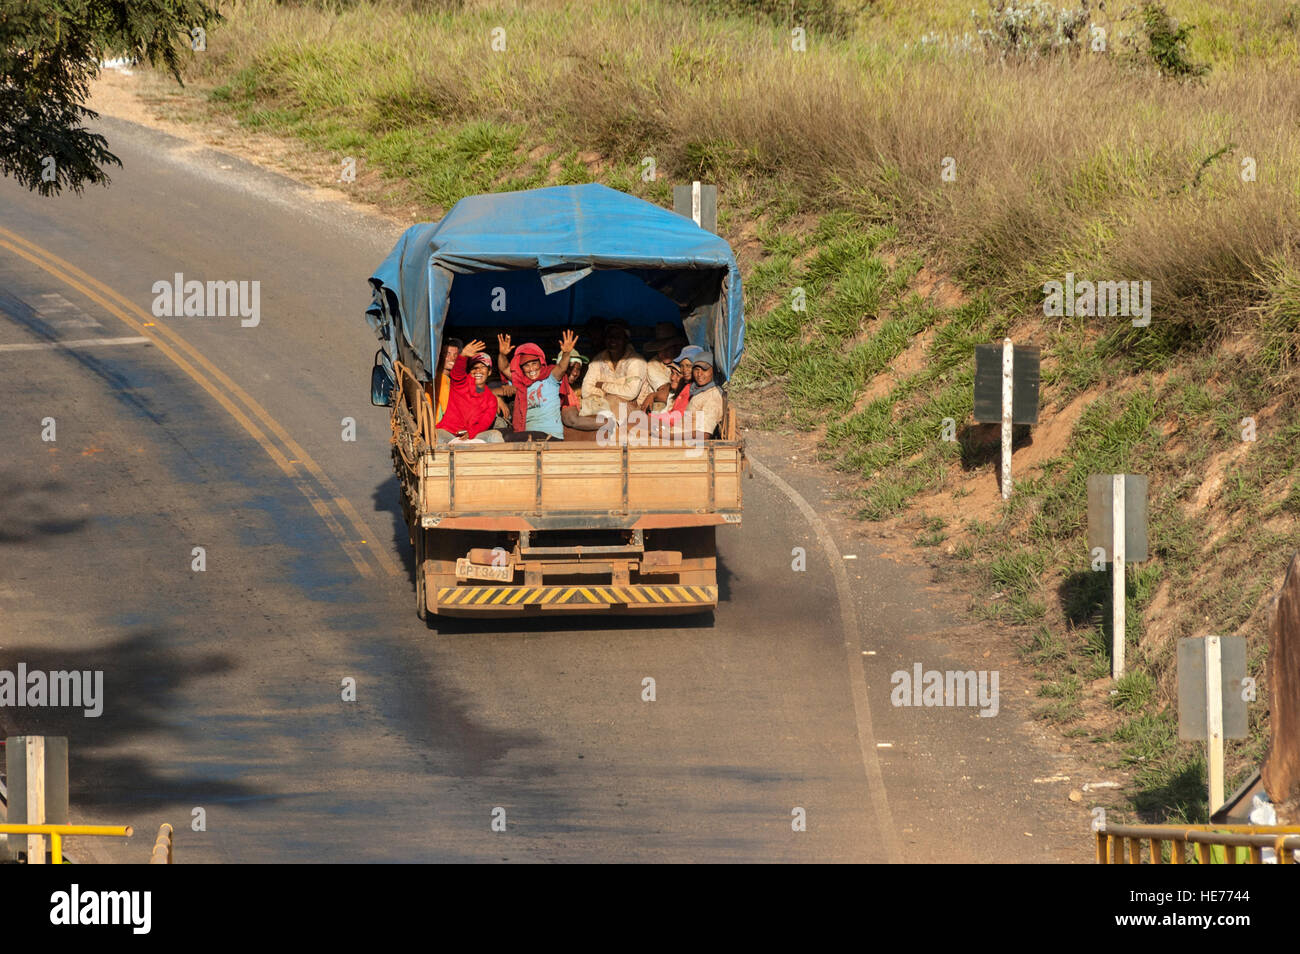 A flatbed truck, lorry, transporting laborers / rural workers in a rural road in Southeast Brazil. Stock Photo